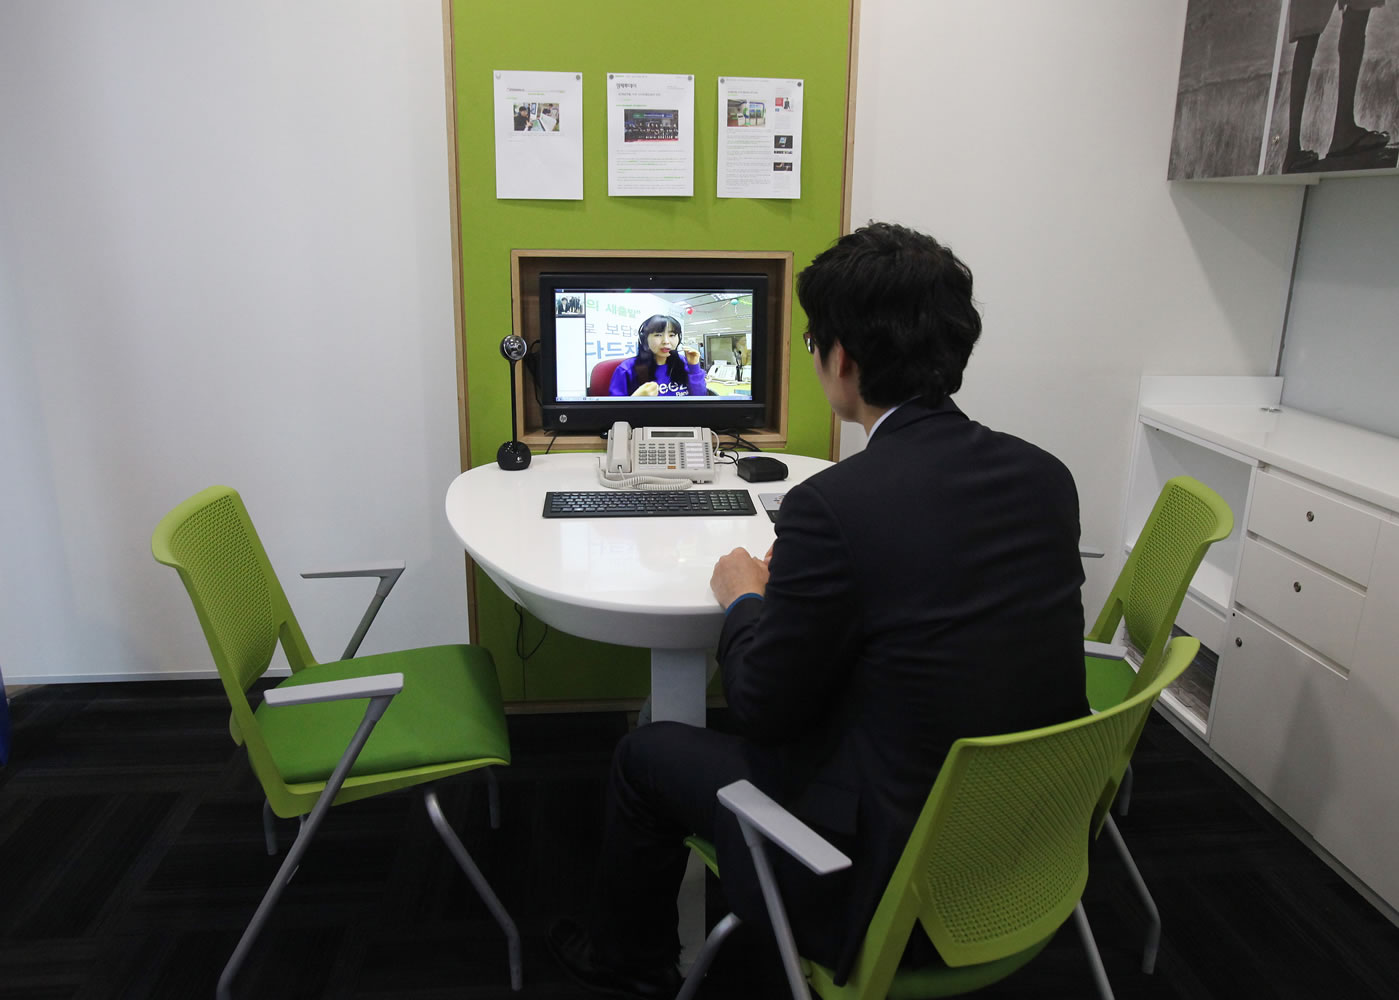 Customer Chung Yong-min does her banking through a screen monitor connected to a video conference with bank employee Oh Ji-young, located in another office, at a Smart Banking Center in Seoul, South Korea.